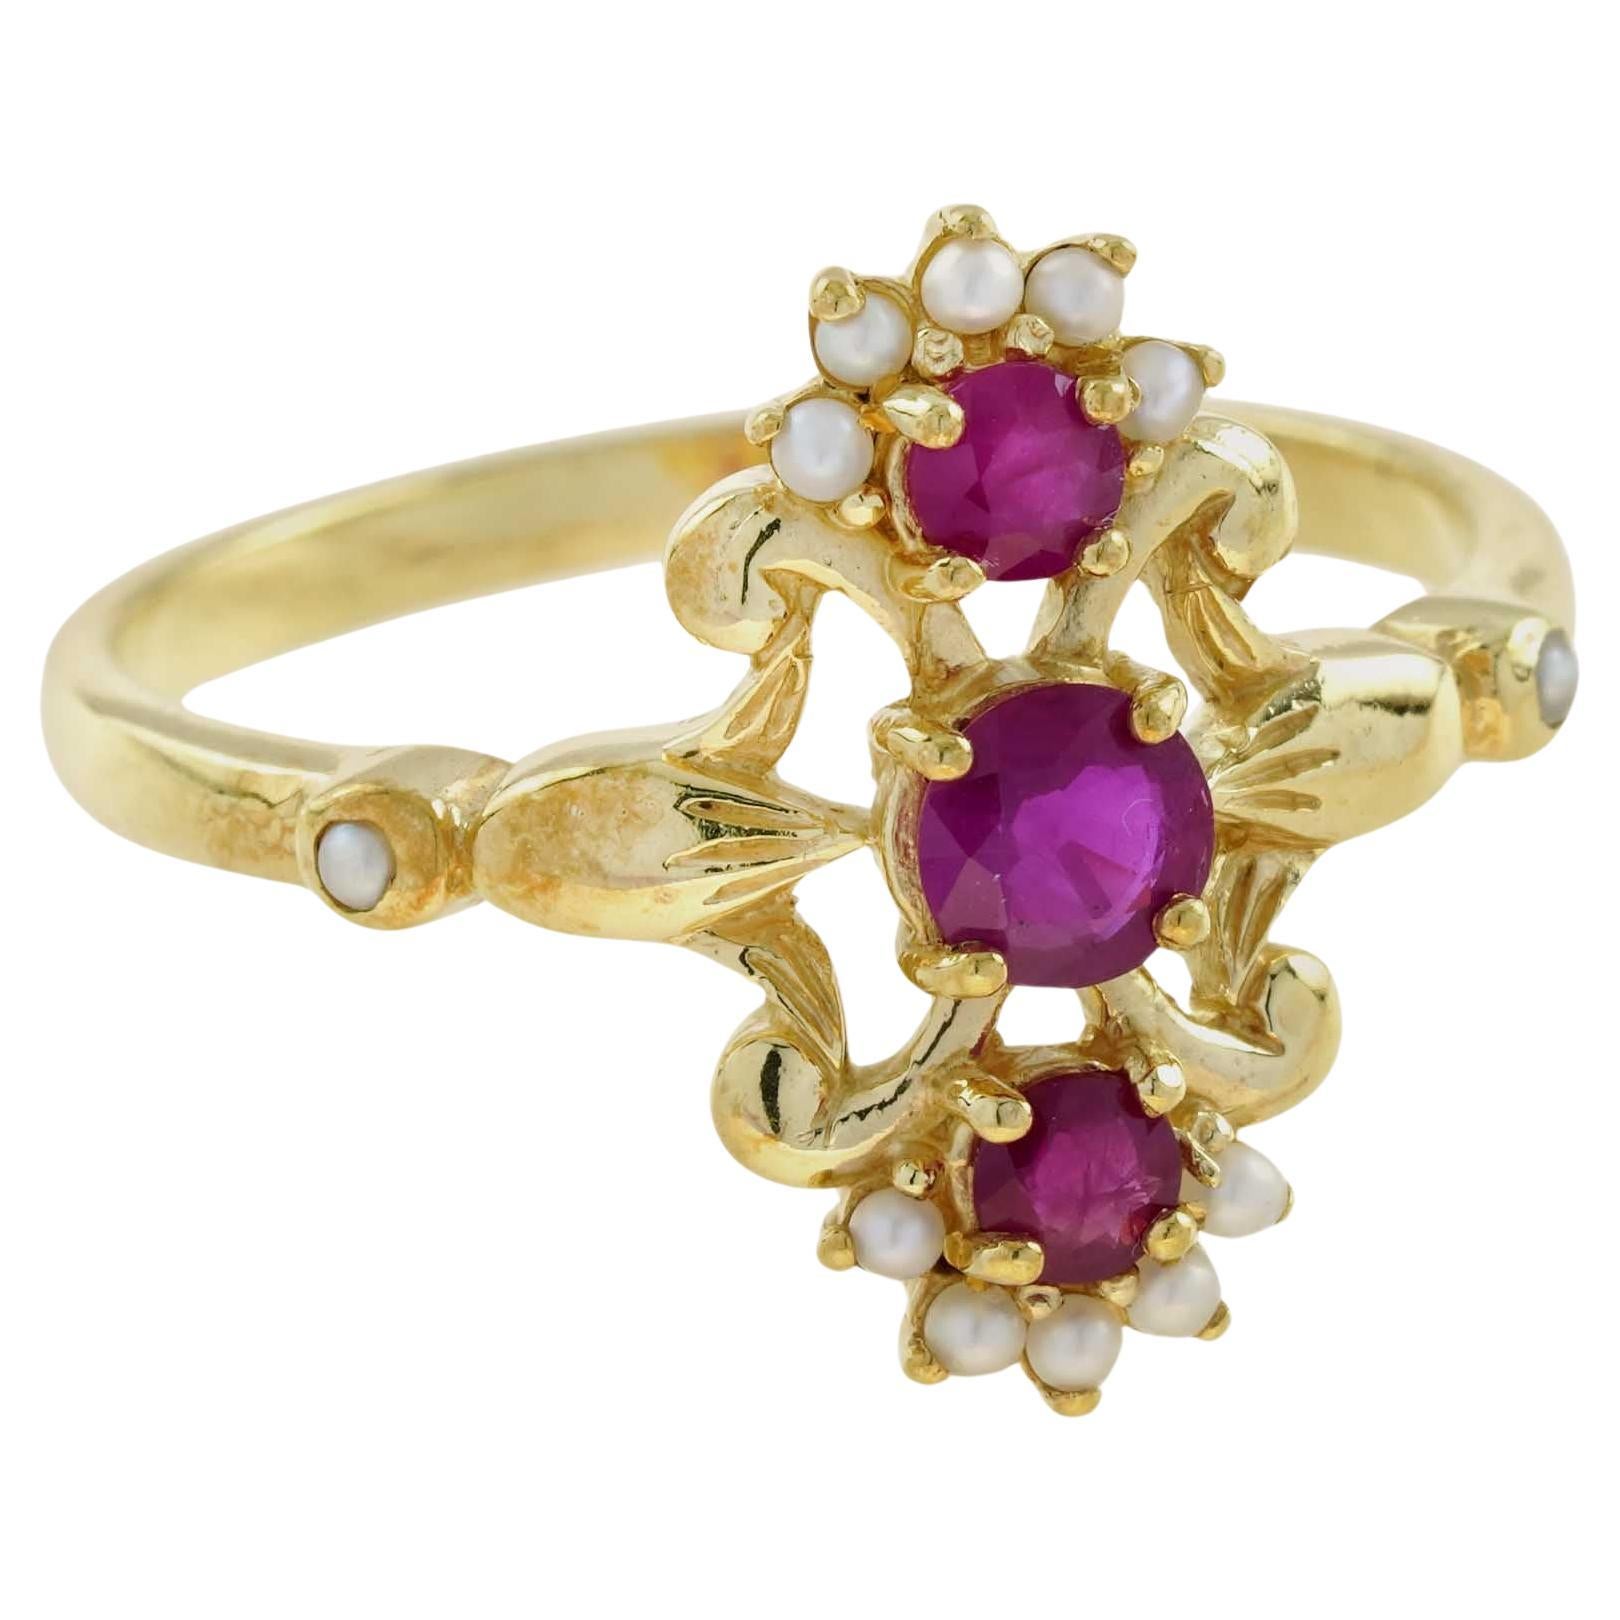 For Sale:  Natural Ruby and Pearl Vintage Style Three Stone Ring in Solid 9K Gold